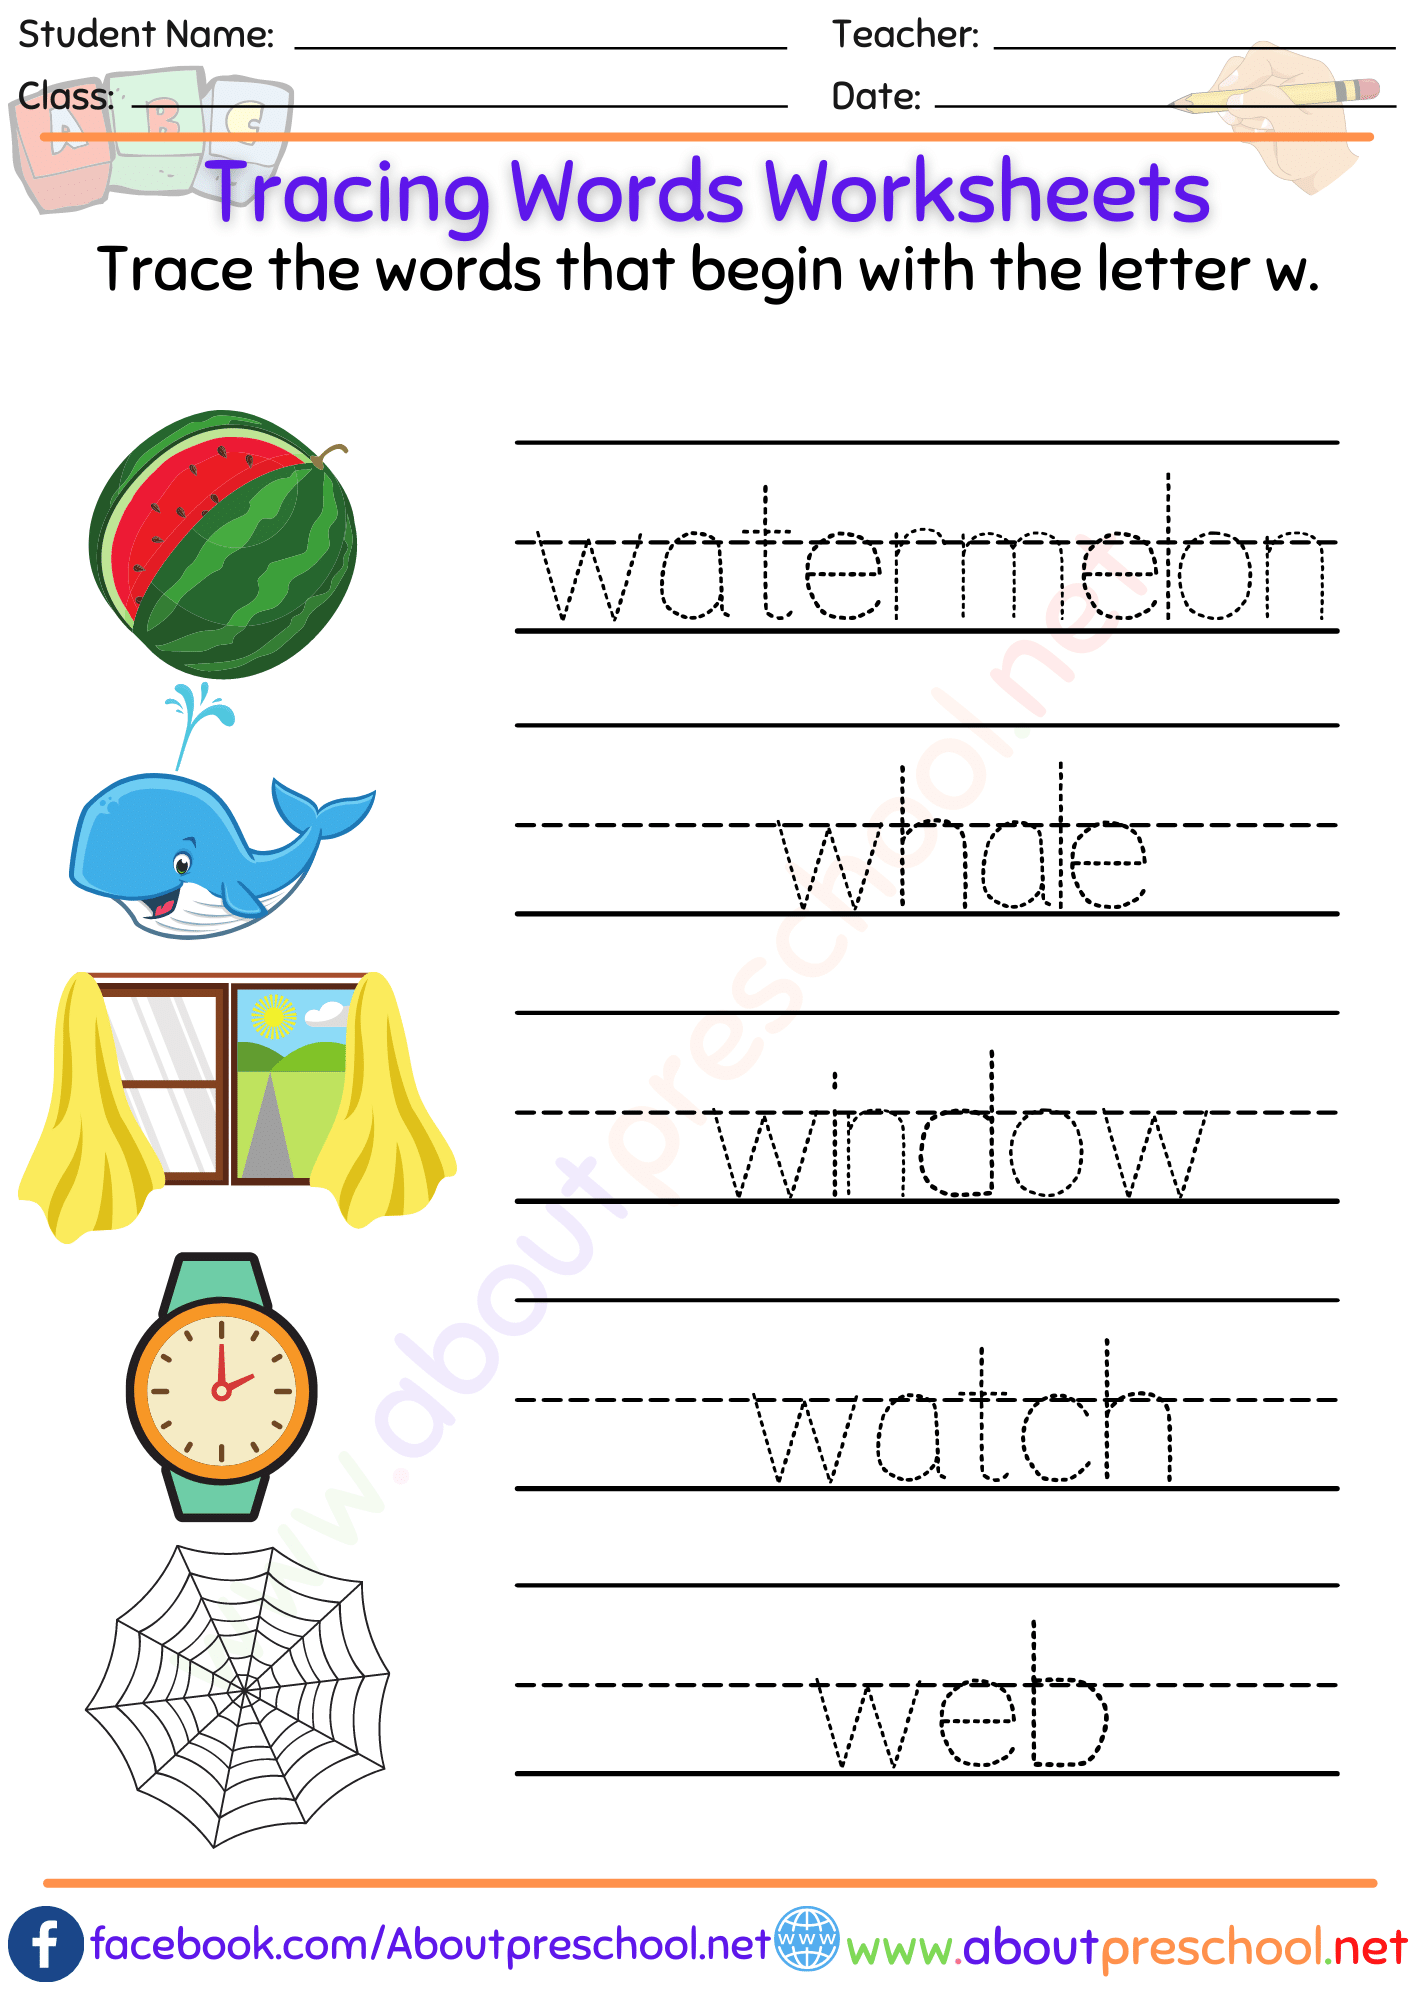 Tracing Words Worksheets-w